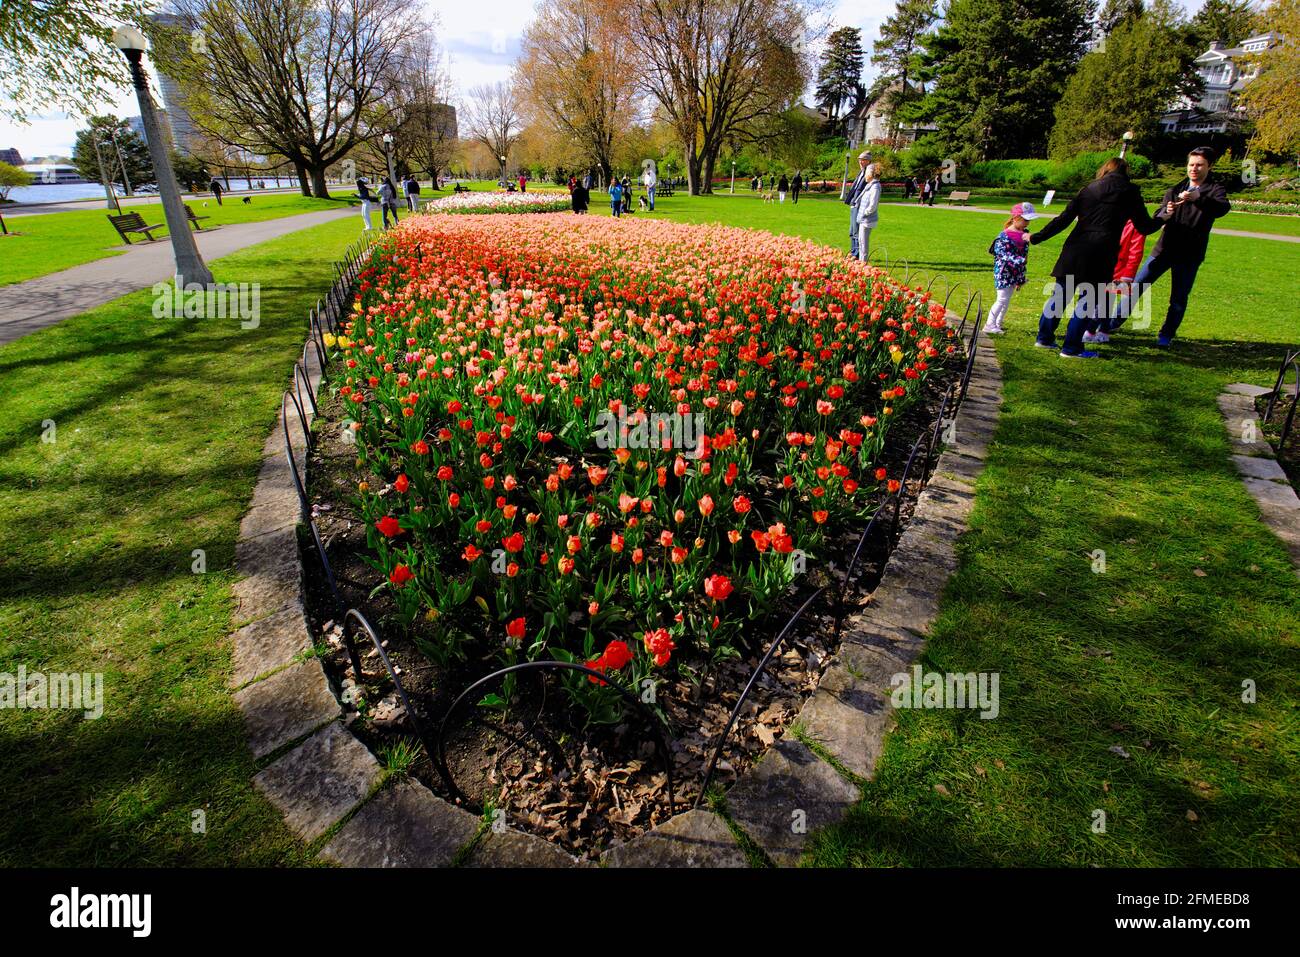 COVID 'crowds' enjoying a bed of beautiful mixed yellow, orange and red tulips at the Canadian Tulip Festival 2021 in Ottawa, Ontario, Canada. Stock Photo